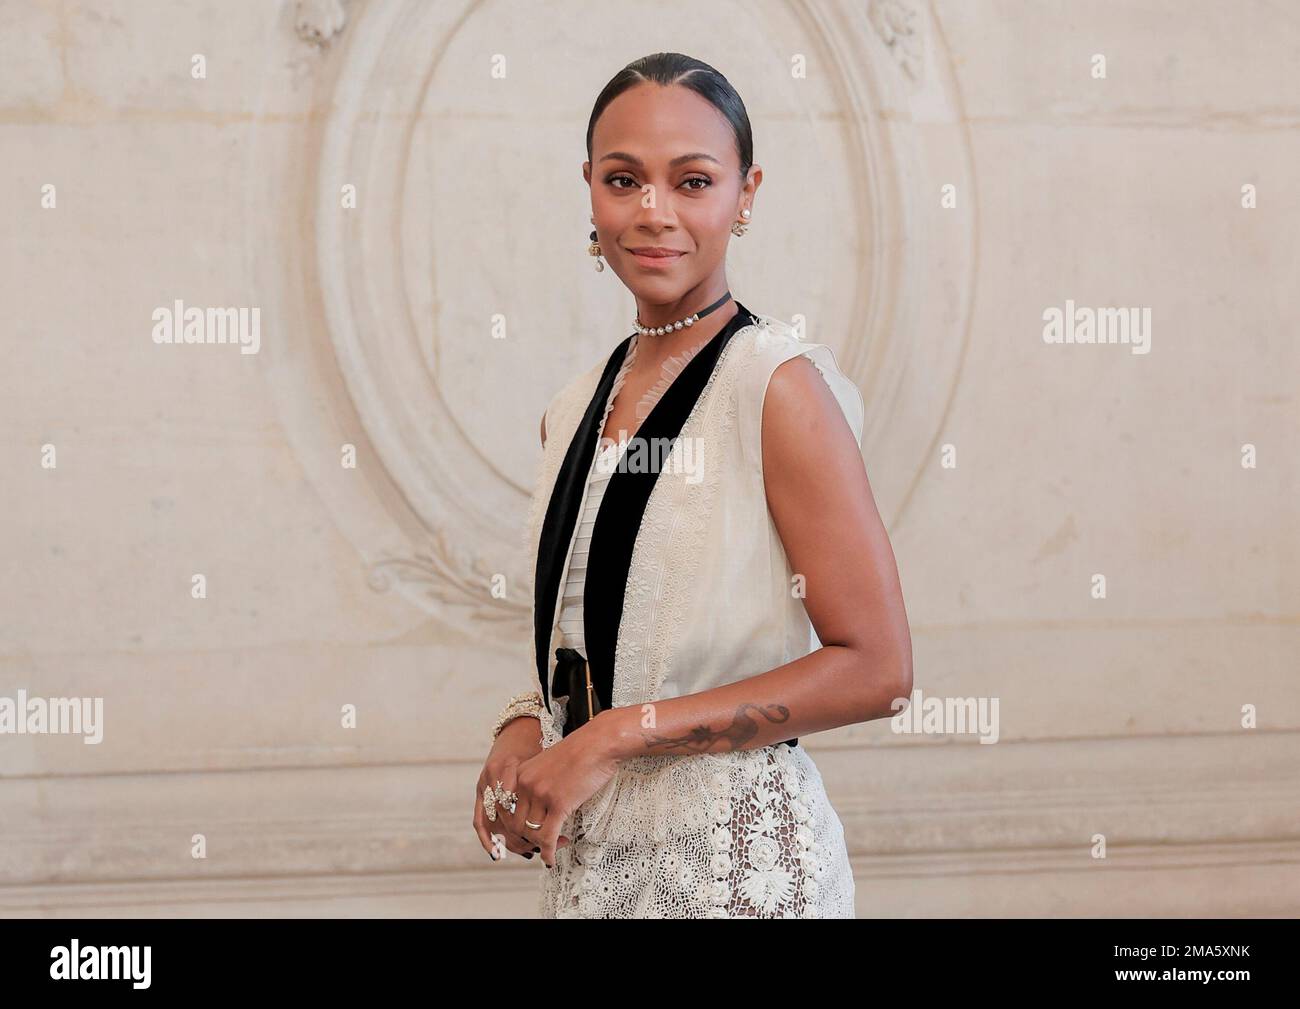 FILE - Zoe Saldana appears at the Dior Haute Couture Fall/Winter 2022-2023  fashion collection in Paris on July 4, 2022. Saldana stars in the Netflix  series "From Scratch." (AP Photo/Lewis Joly, File